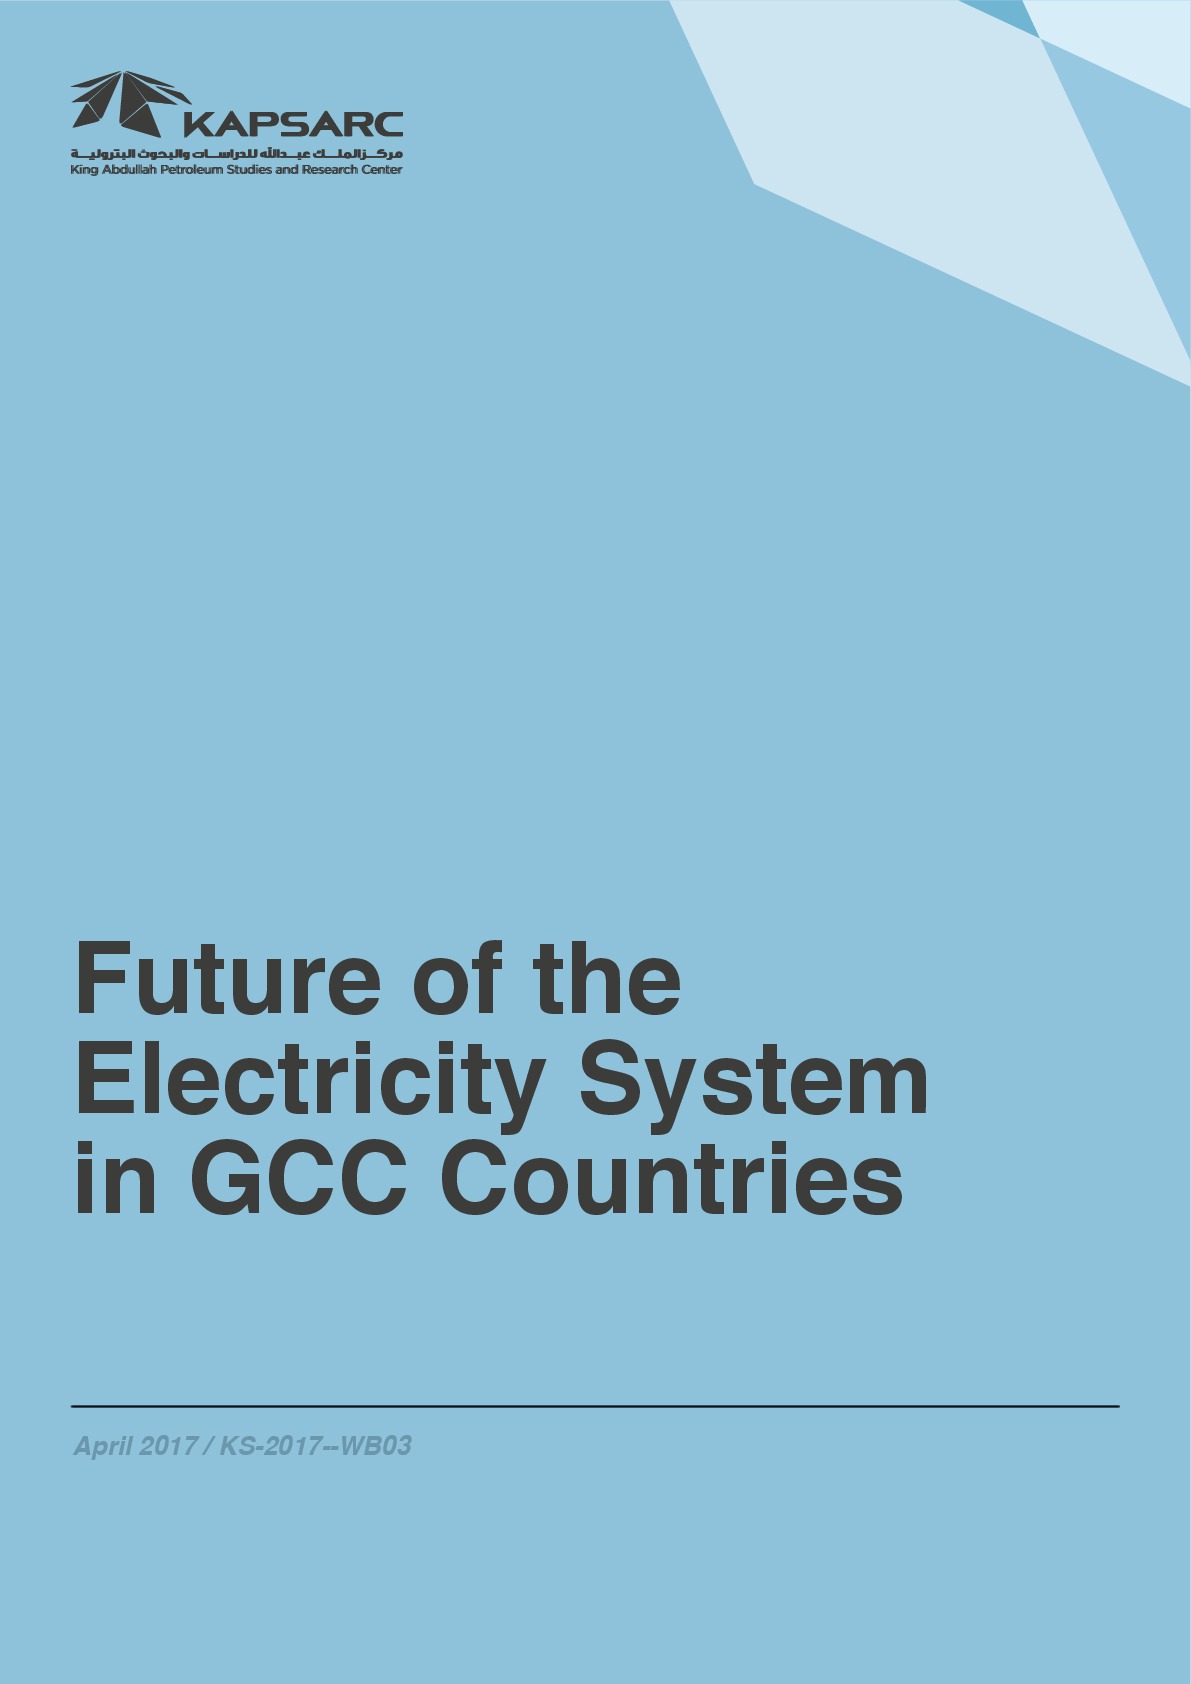 Future of the Electricity System in GCC Countries